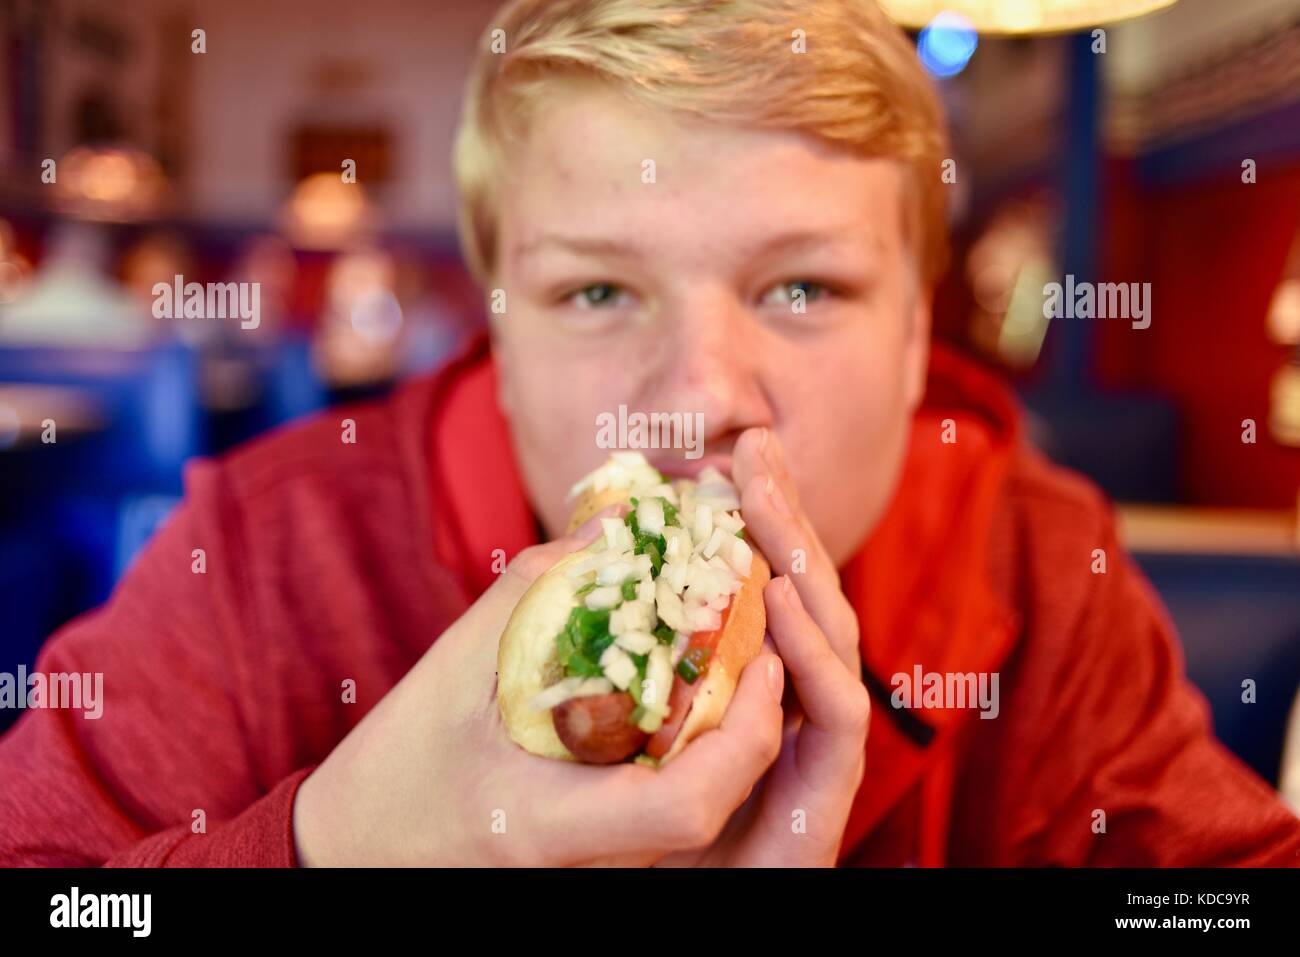 Teenager boy biting into a large hot dog with onions and relish at Wilson's Restaurant in the Door County community of Ephriam, Wisconsin, USA. Stock Photo